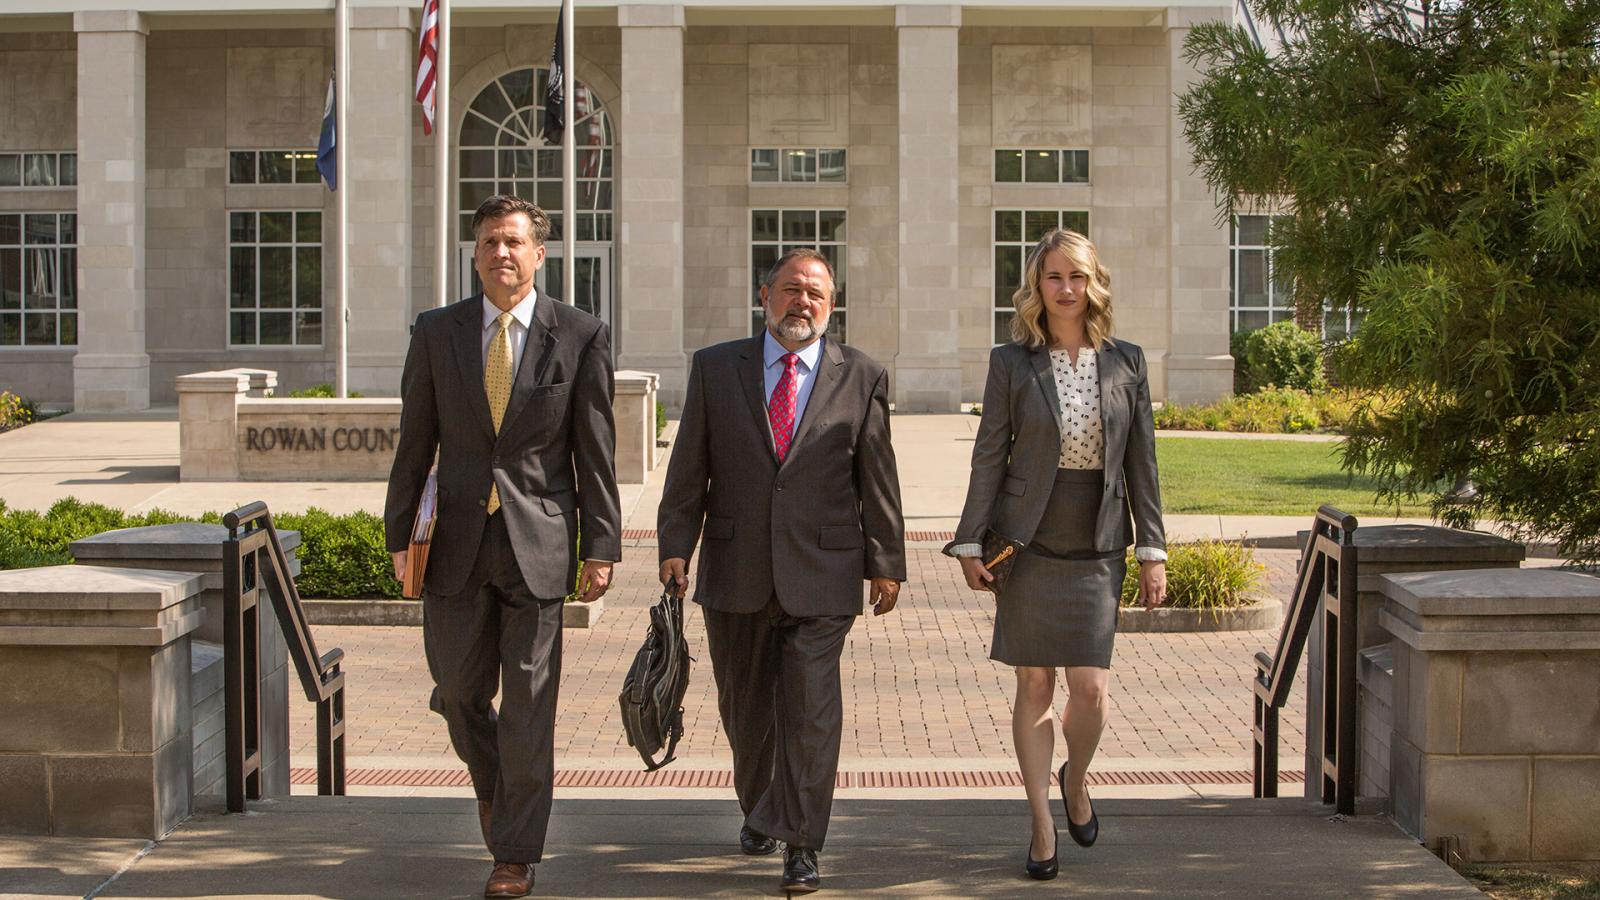 Campbell & Rogers Lawyers: Earl Rogers III, Michael Campbell, and Erica Stacy-Stegman